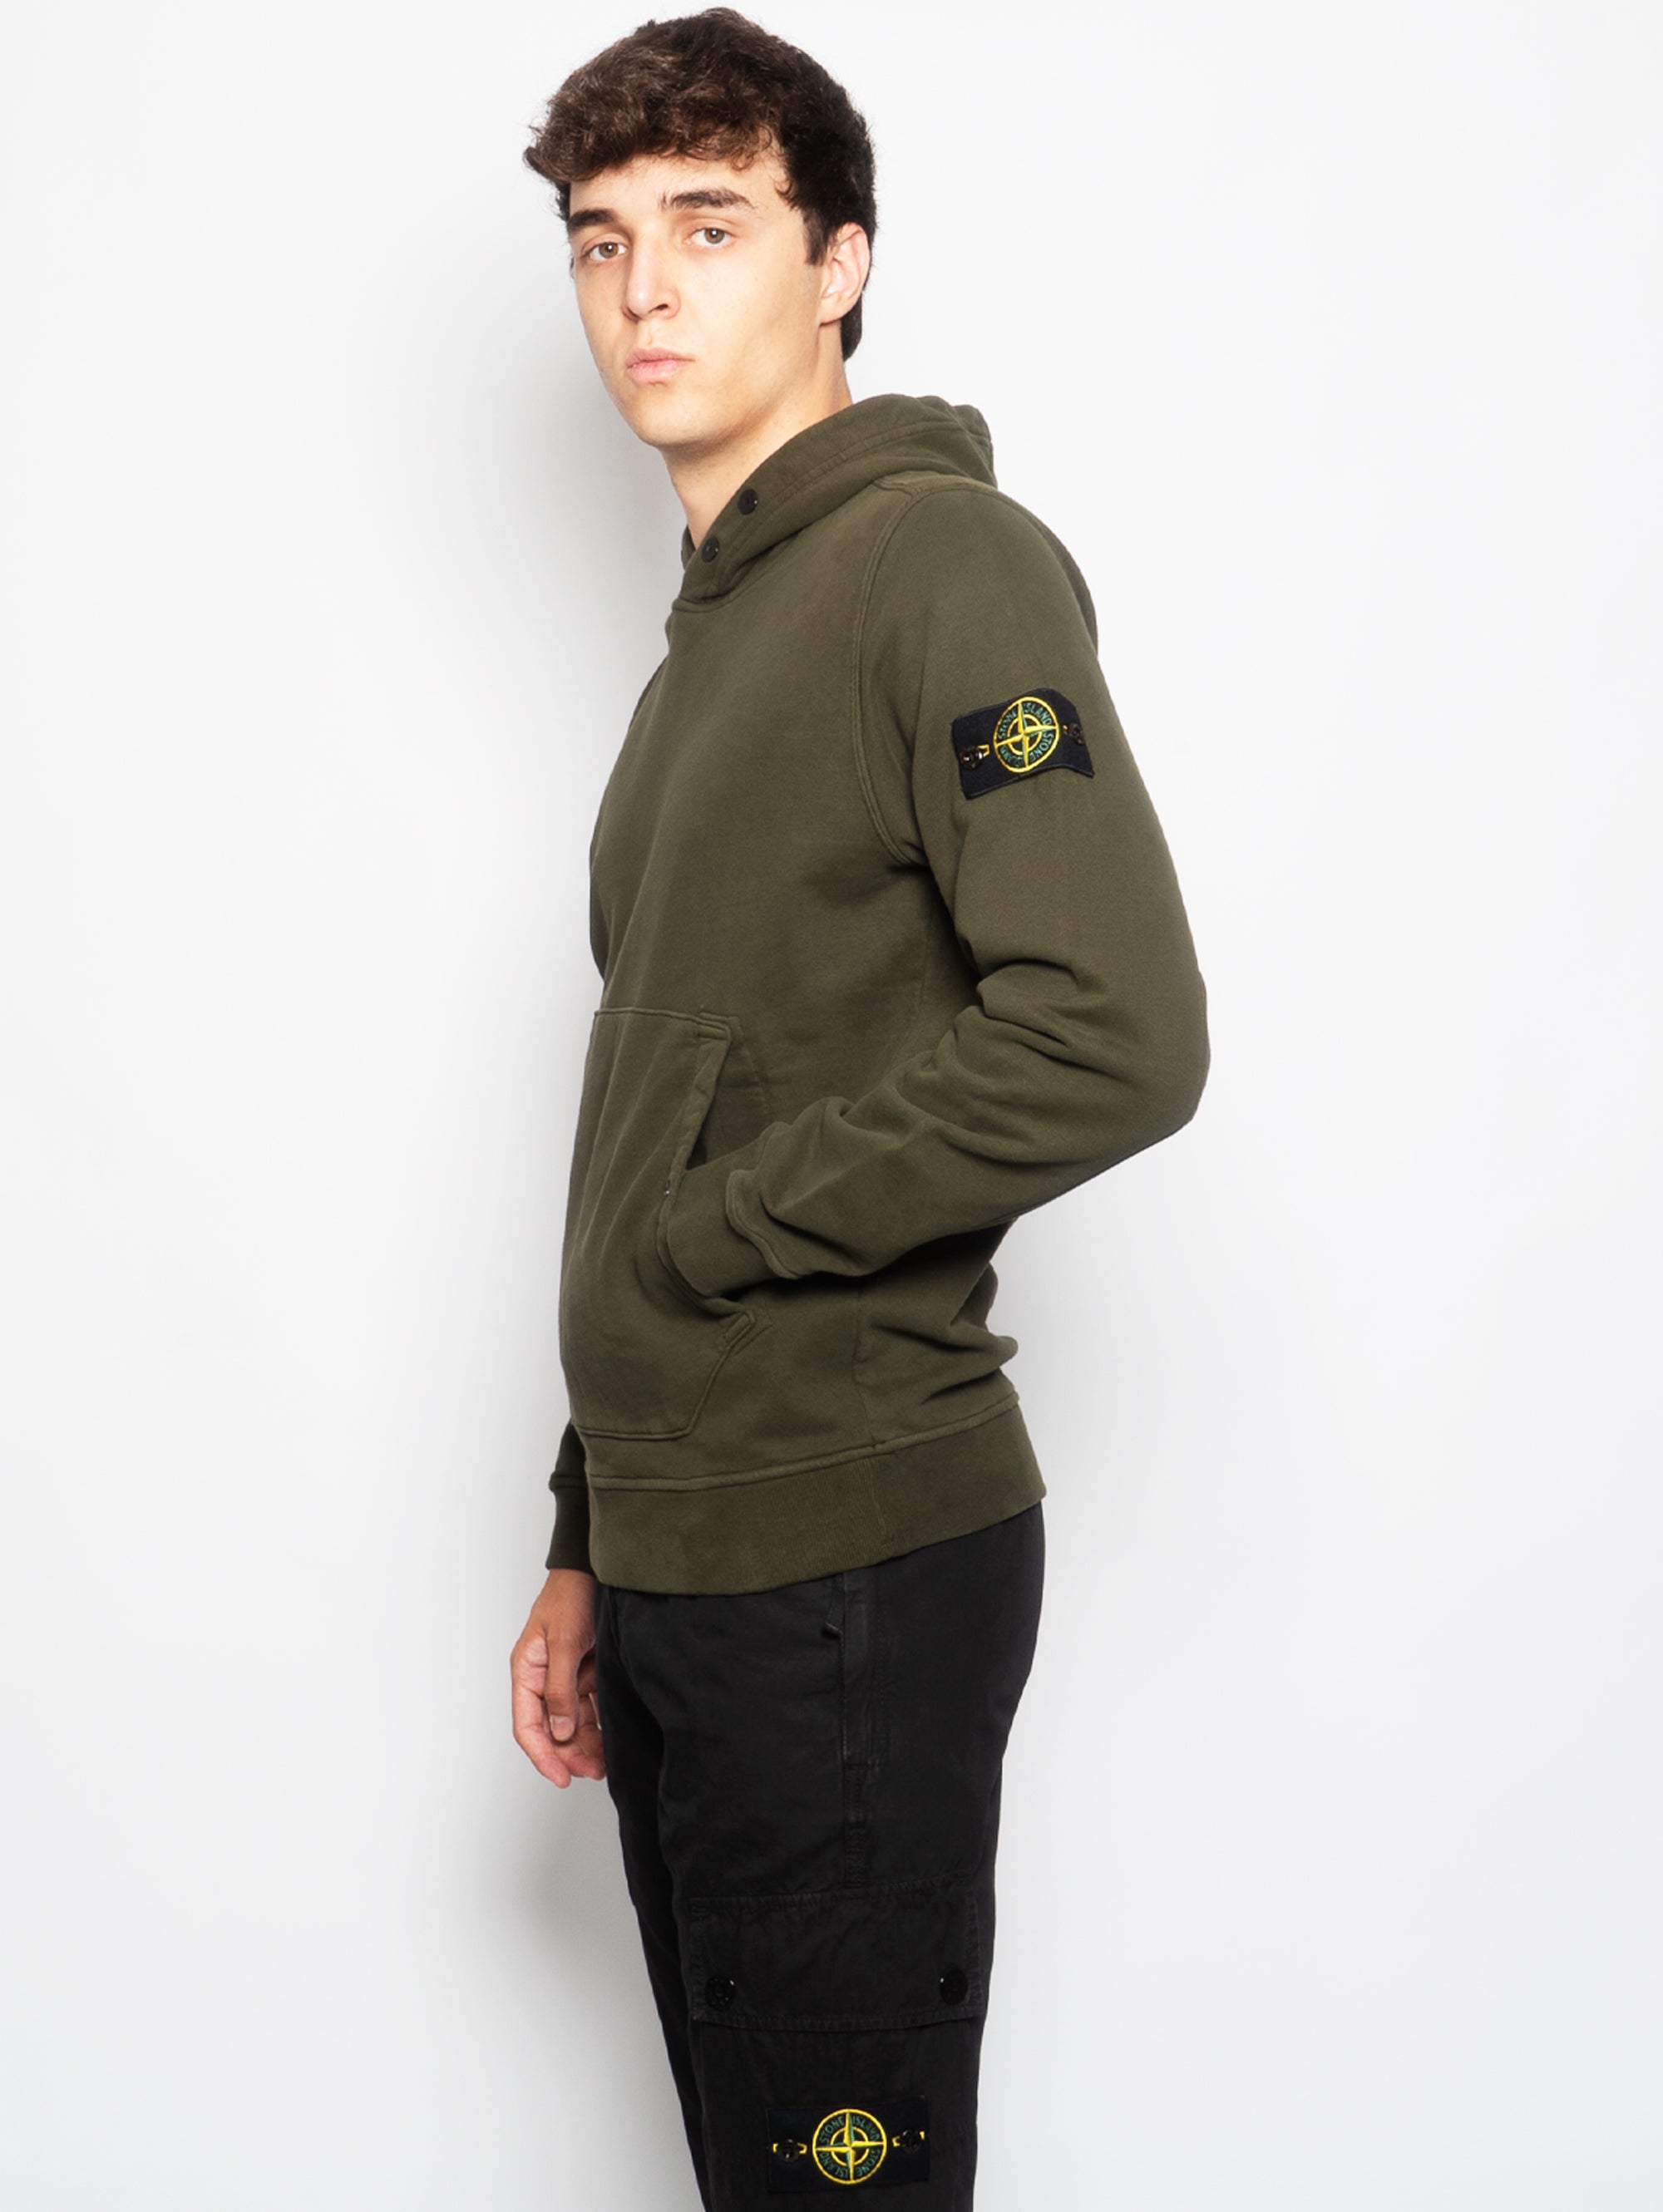 Olive Hooded Sweatshirt with Pouch Pocket